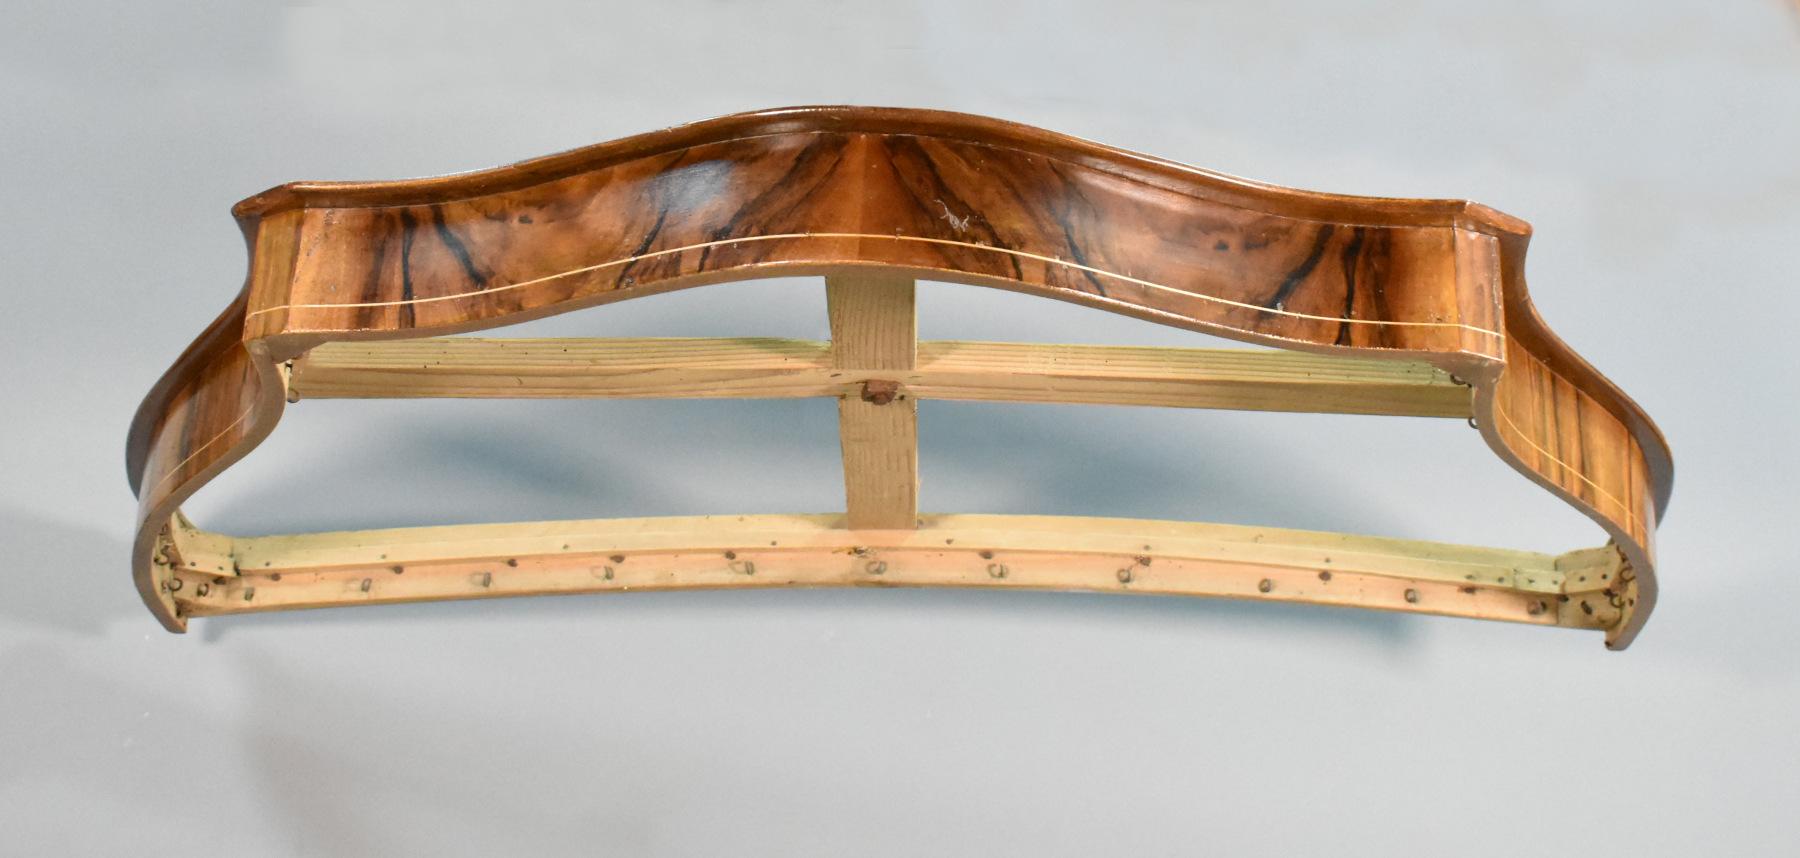 Antique French walnut Ciel de Lit bed Canopy Corona

This Ciel de Lit is crafted in striking walnut with contrasting boxwood inlay and can be hung with drapes / bed curtains (not included). 

The piece is in very good condition with a lovely patina